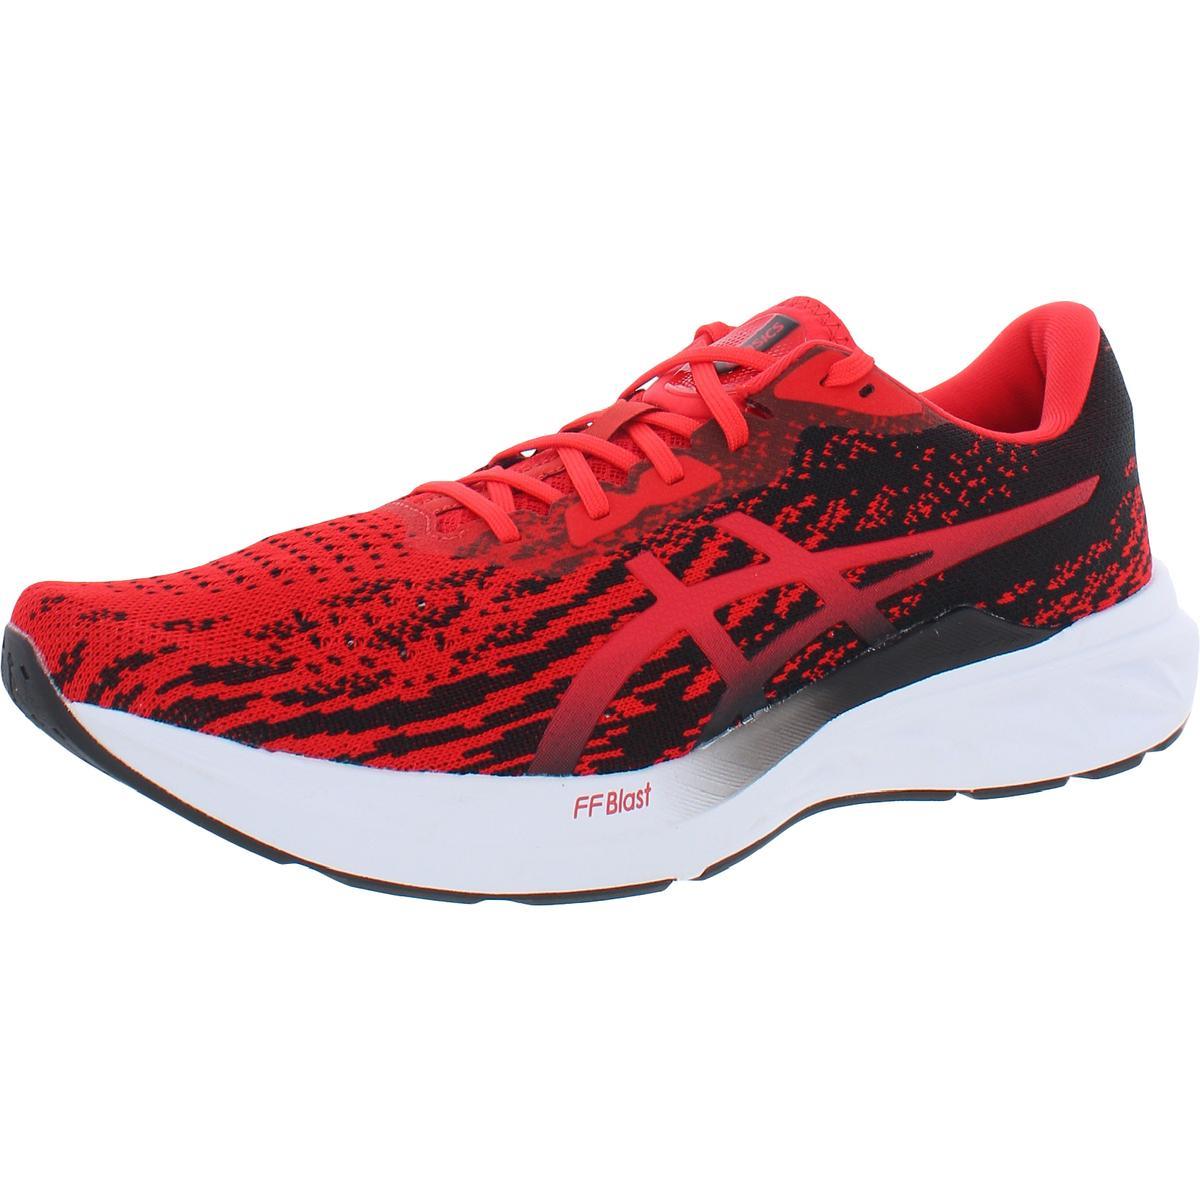 Asics Mens Dynablast 2 Lace up Athletic and Training Shoes Sneakers Bhfo 9859 Electric Red/Black